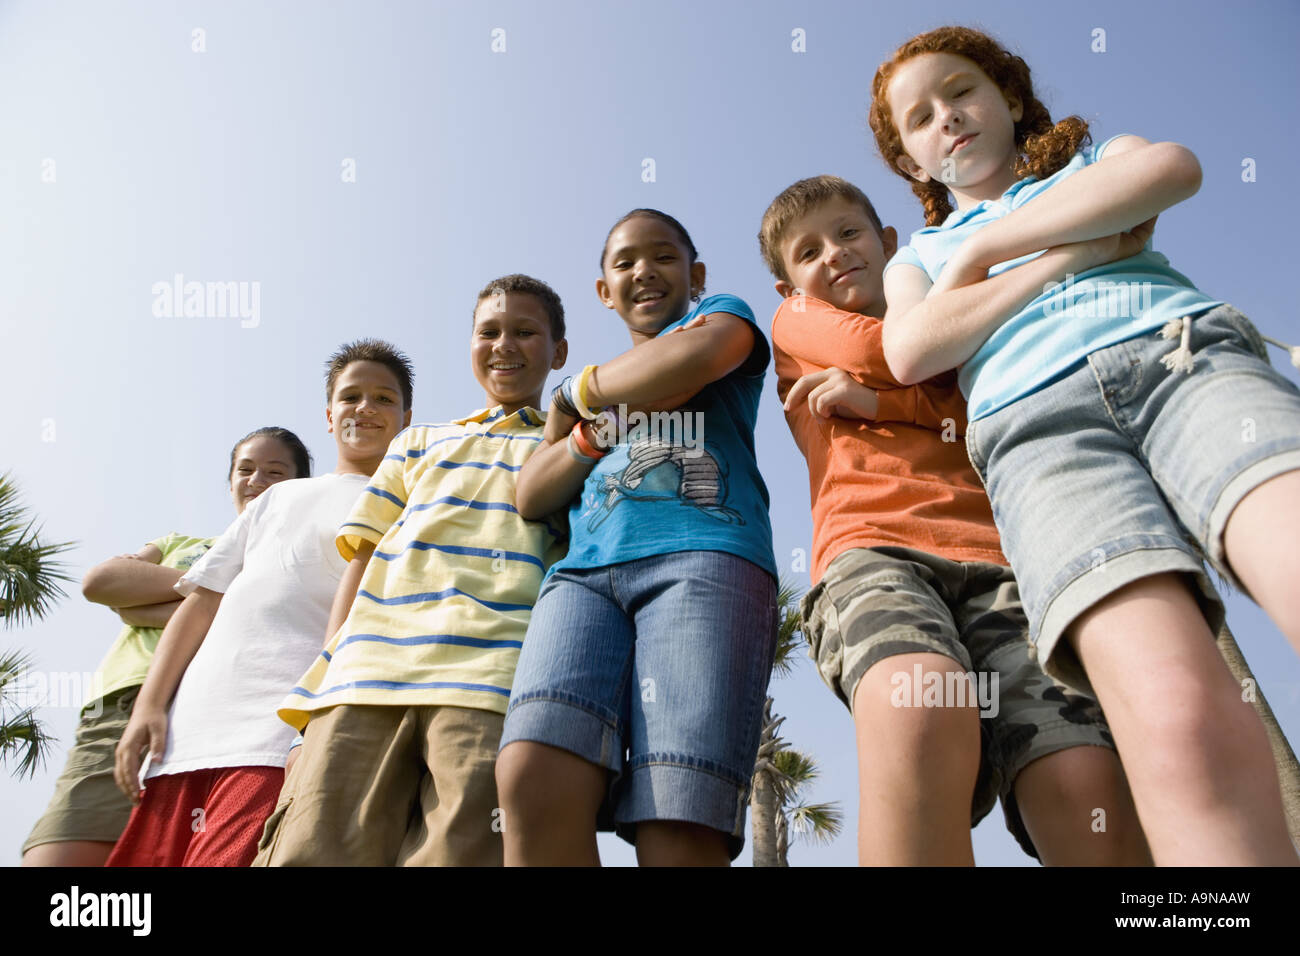 Portrait of children with folded arms standing abreast at a